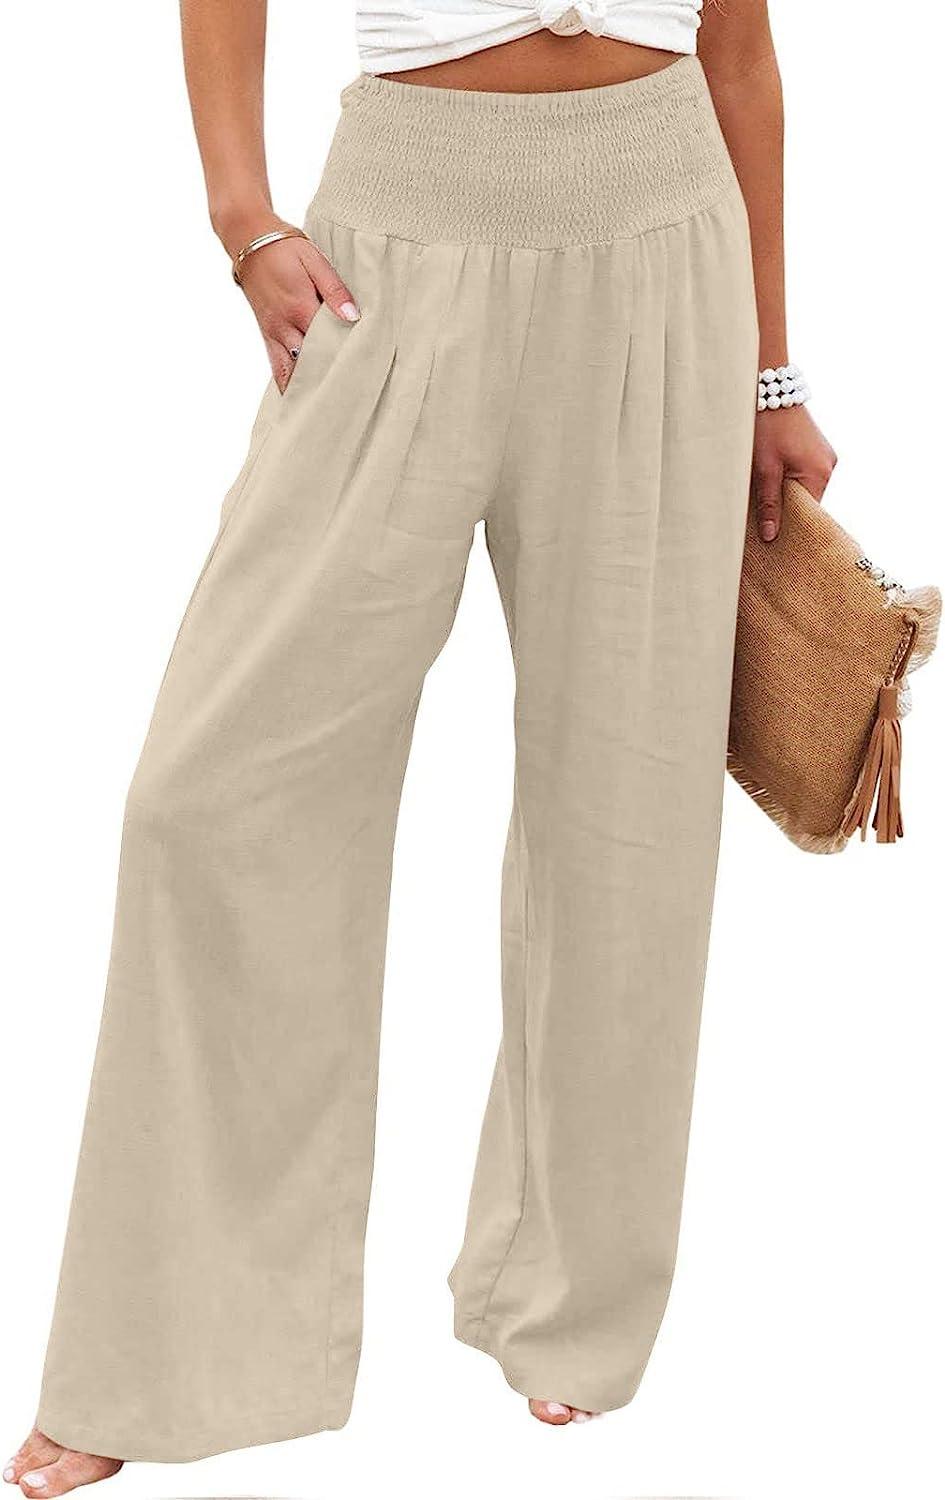 Womens Casual Cotton Linen Baggy Wide-Leg Pants Loose Palazzo Flared  Trousers US